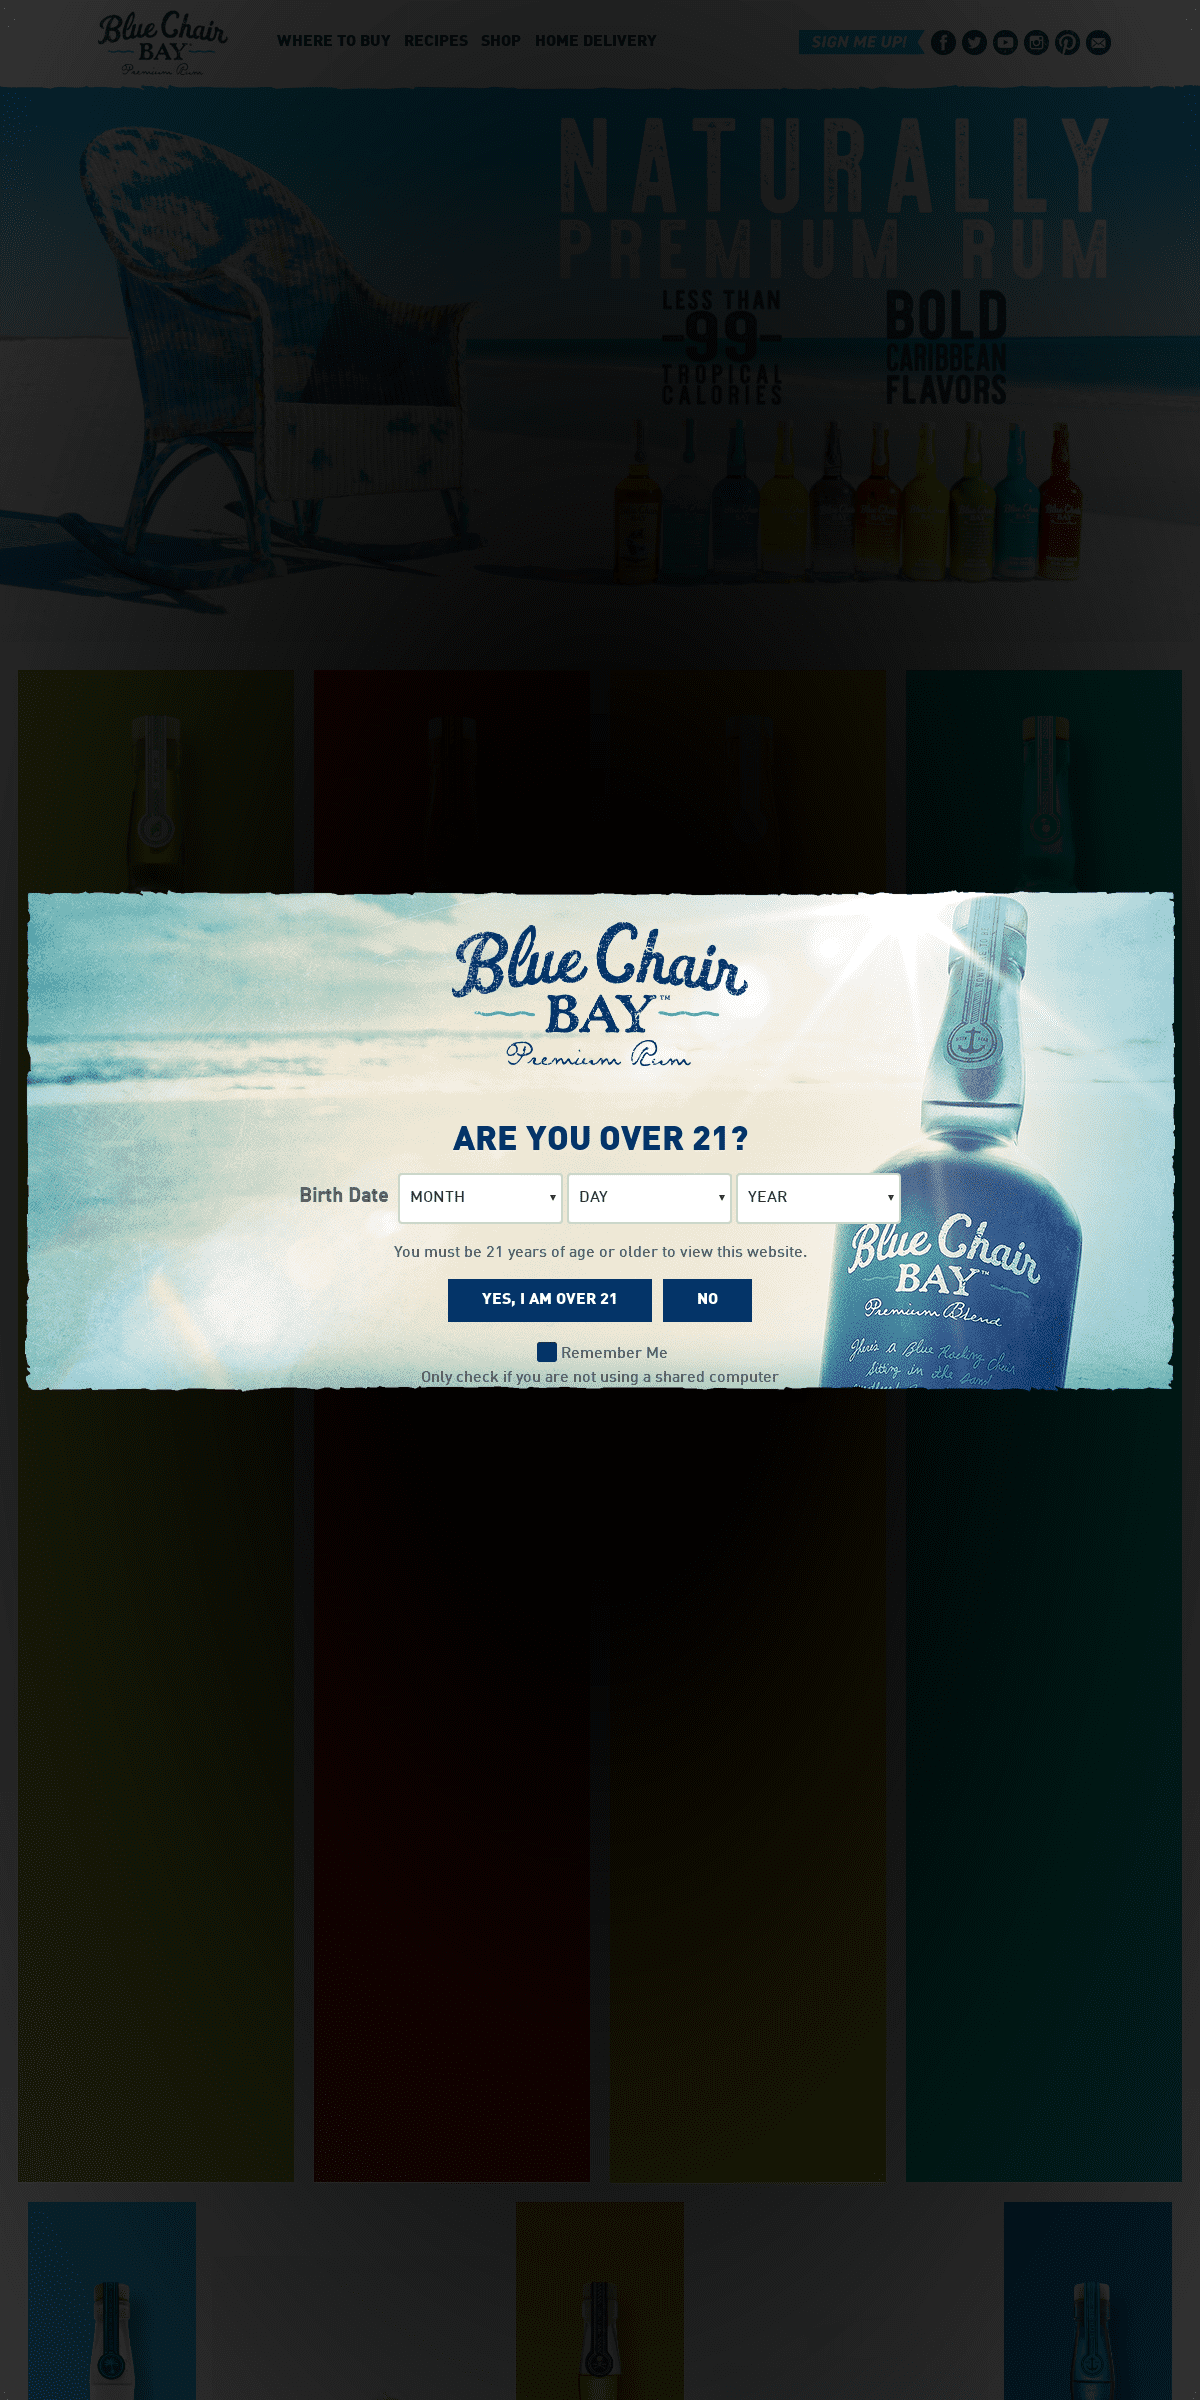 A complete backup of bluechairbayrum.com